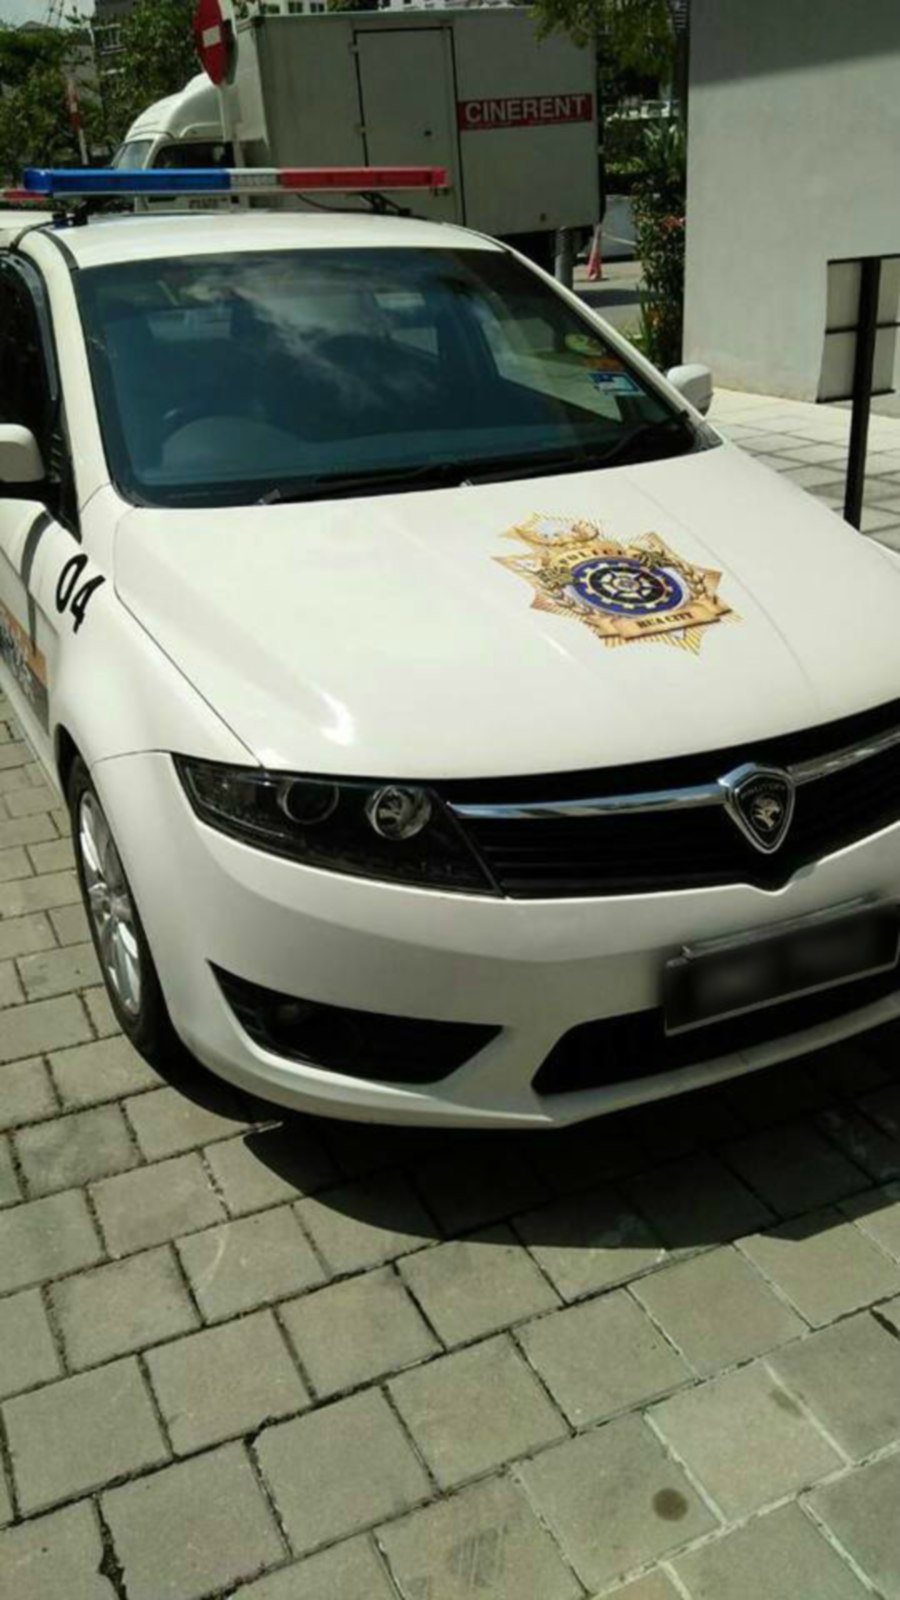 One of the two photo of Malaysian police vehicles emblazoned with Chinese characters was posted on social media. The vehicles were props used for filming a movie, police said in a statement. Pix courtesy of NST reader 